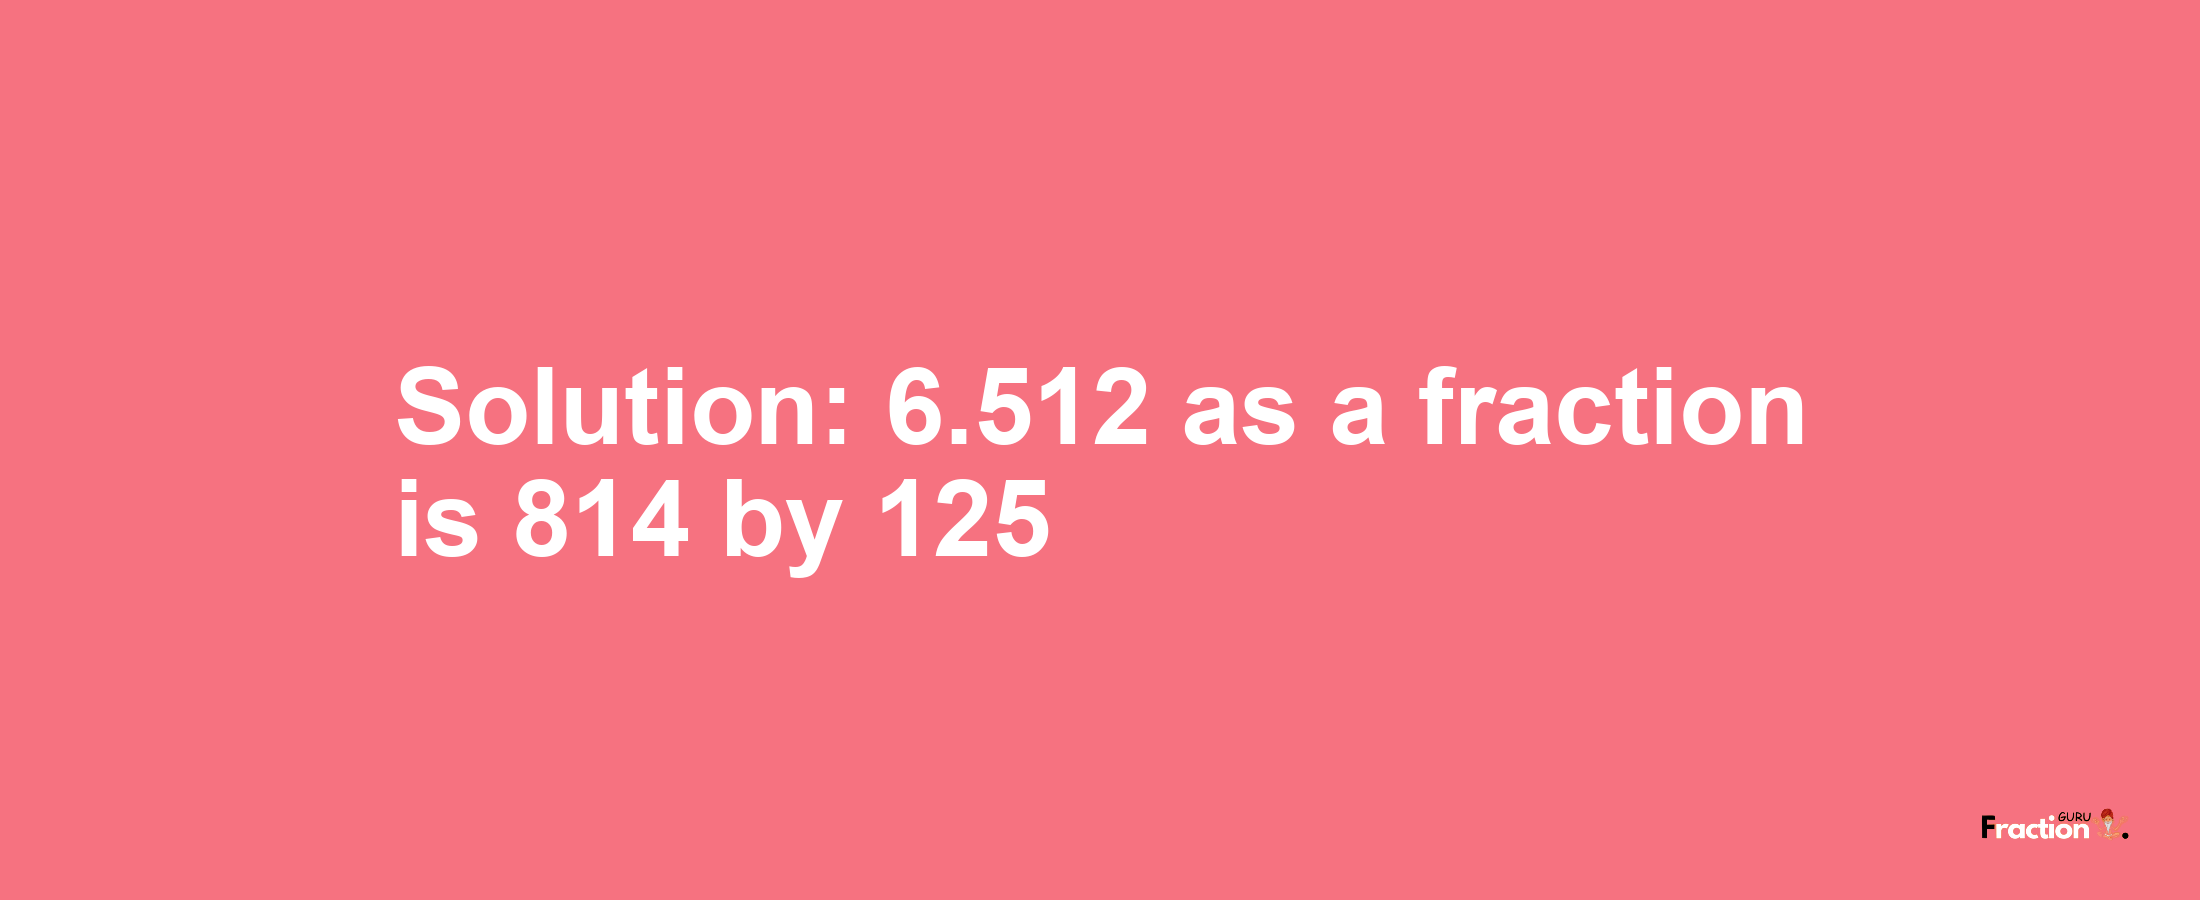 Solution:6.512 as a fraction is 814/125